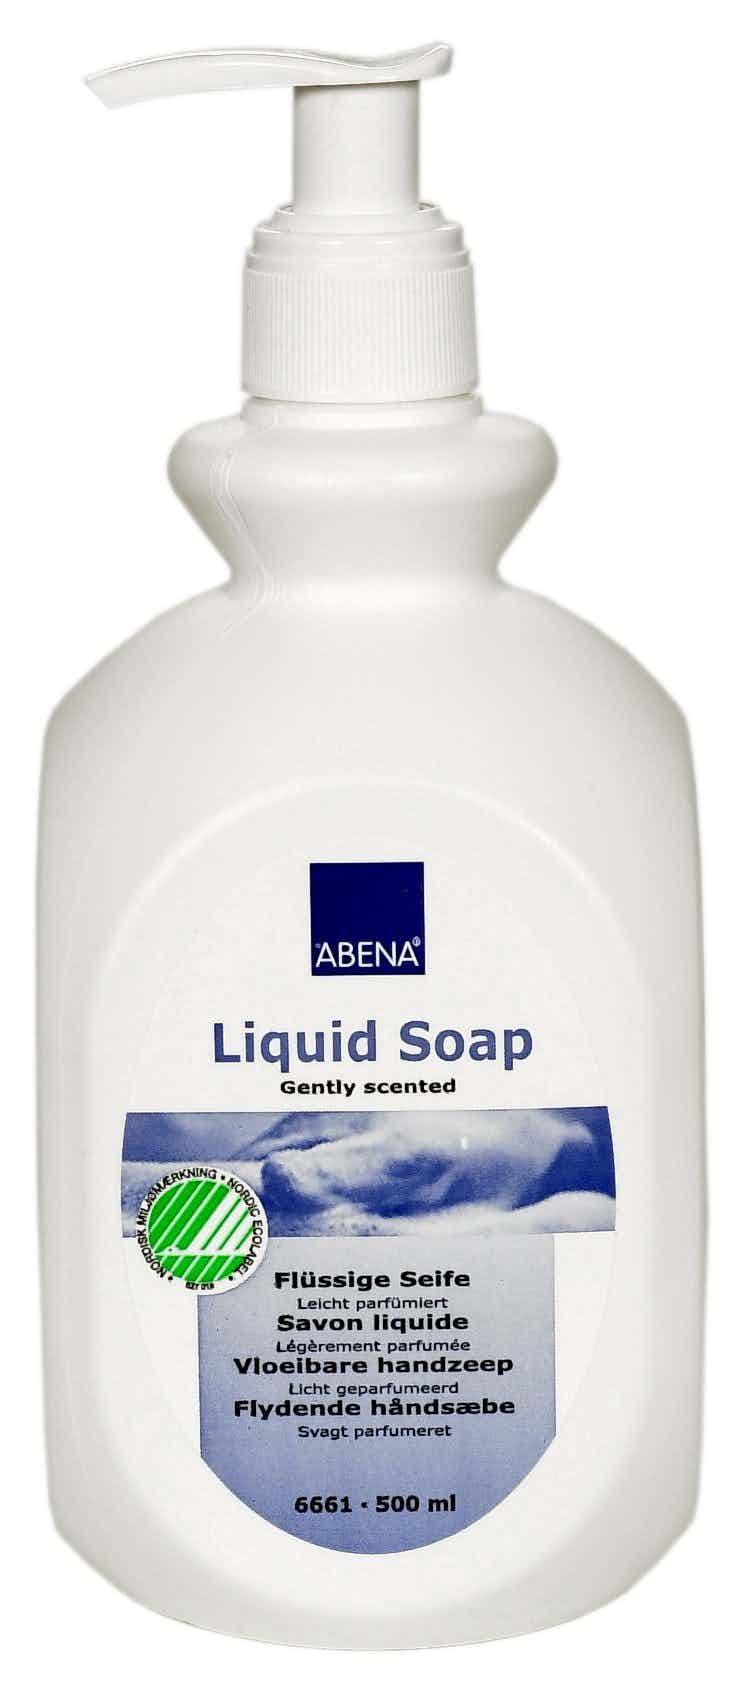 Abena Liquid Soap, Gently Scented, 500 mL, 6661, 1 Each